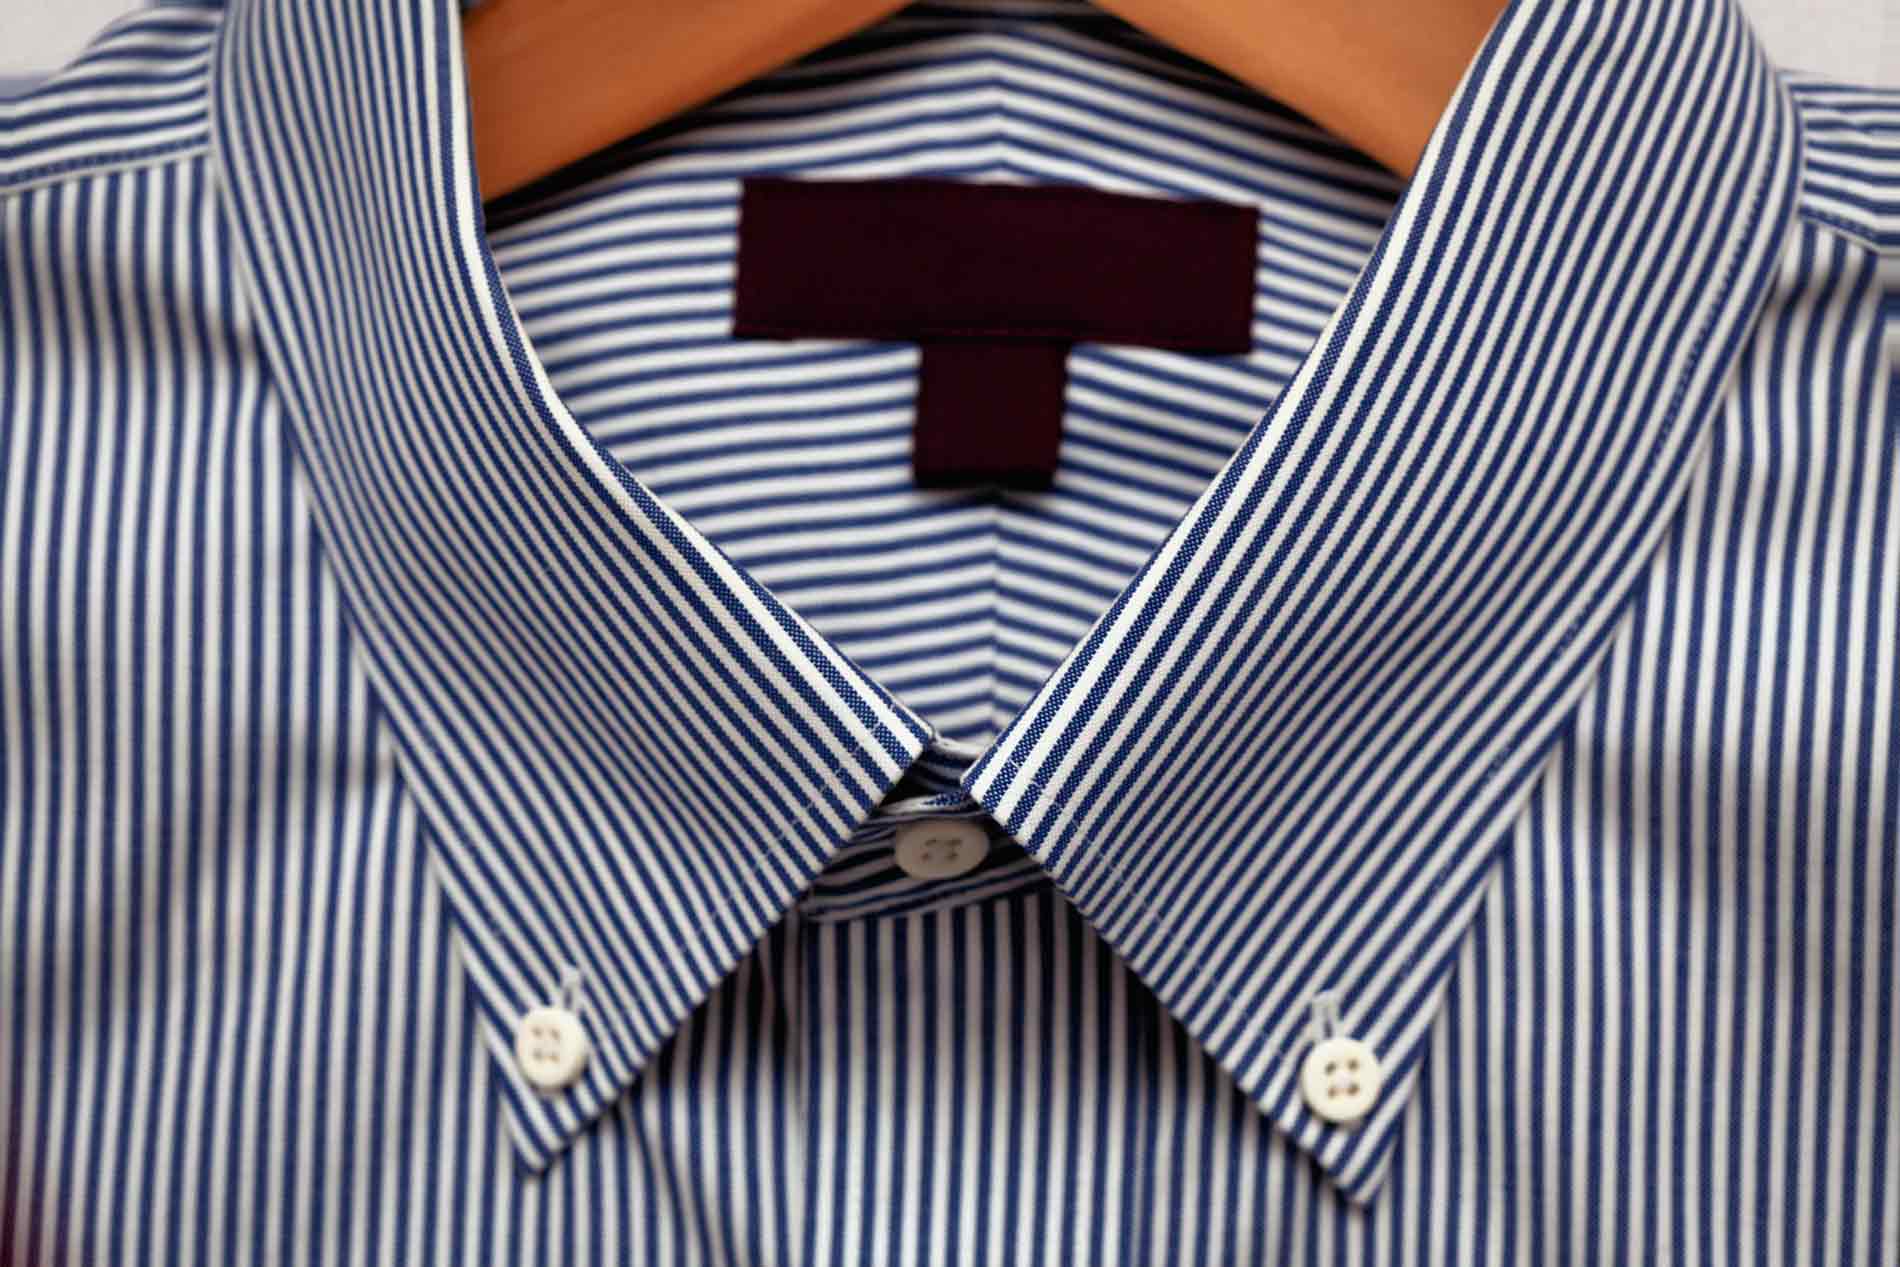 Dry Cleaning A Dress Shirt